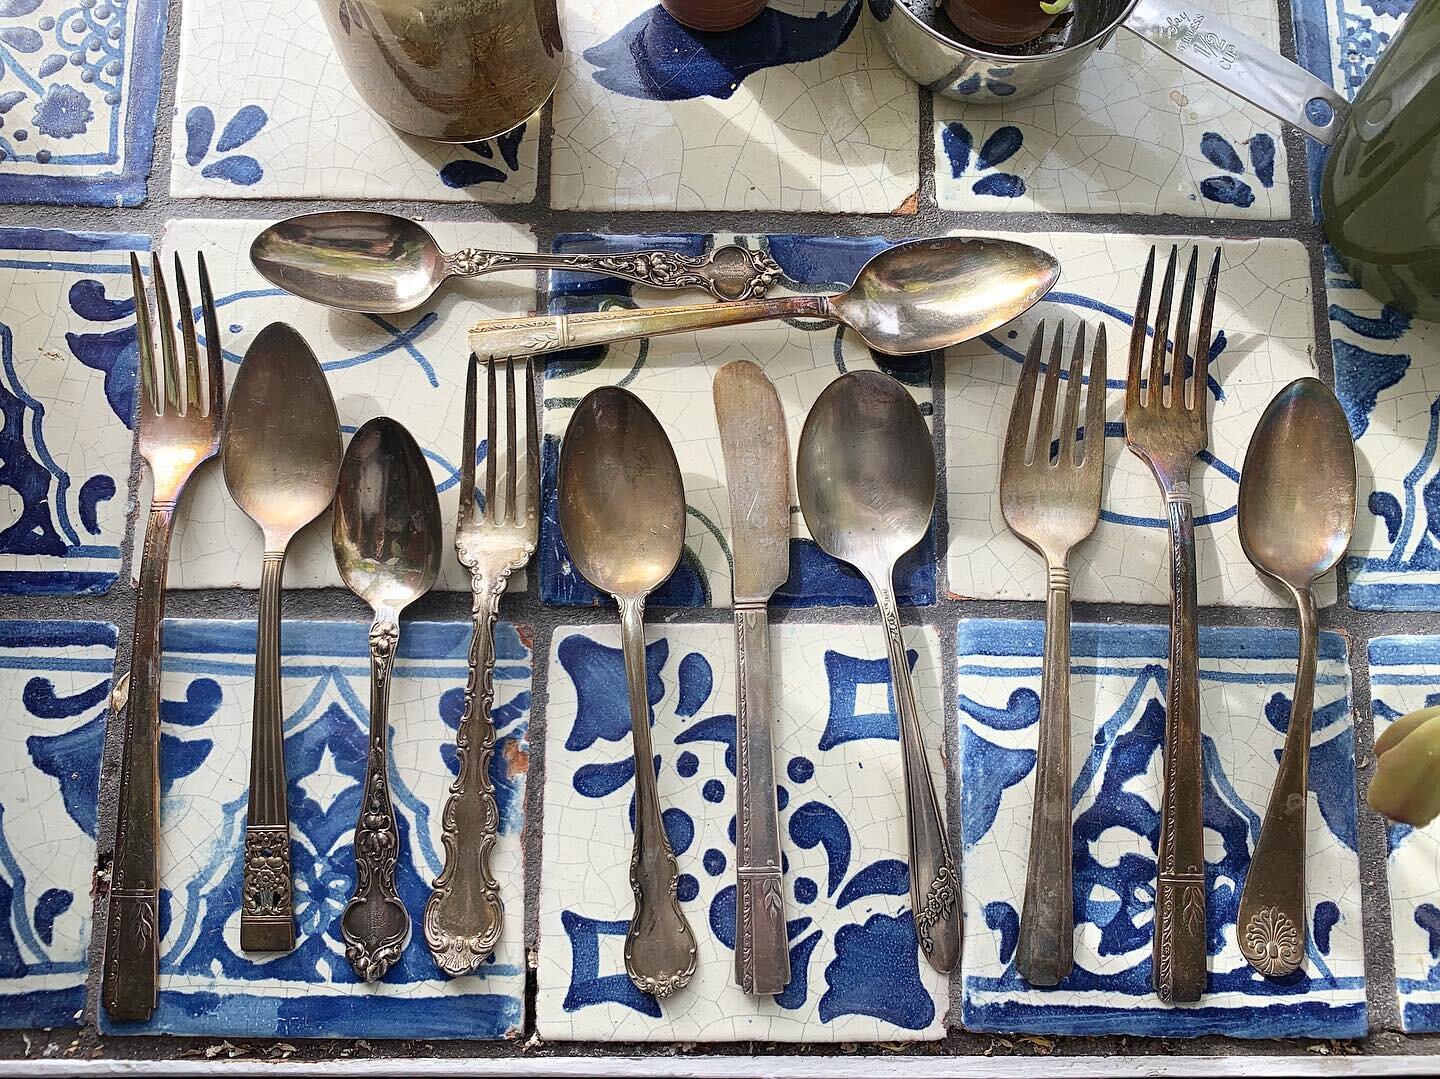 Silverware from my mom&rsquo;s side of the family, her grandparents and great grandparents. A huge inspiration for me making silverware has been just recently seeing both sides of my family&rsquo;s own remnants of sets.